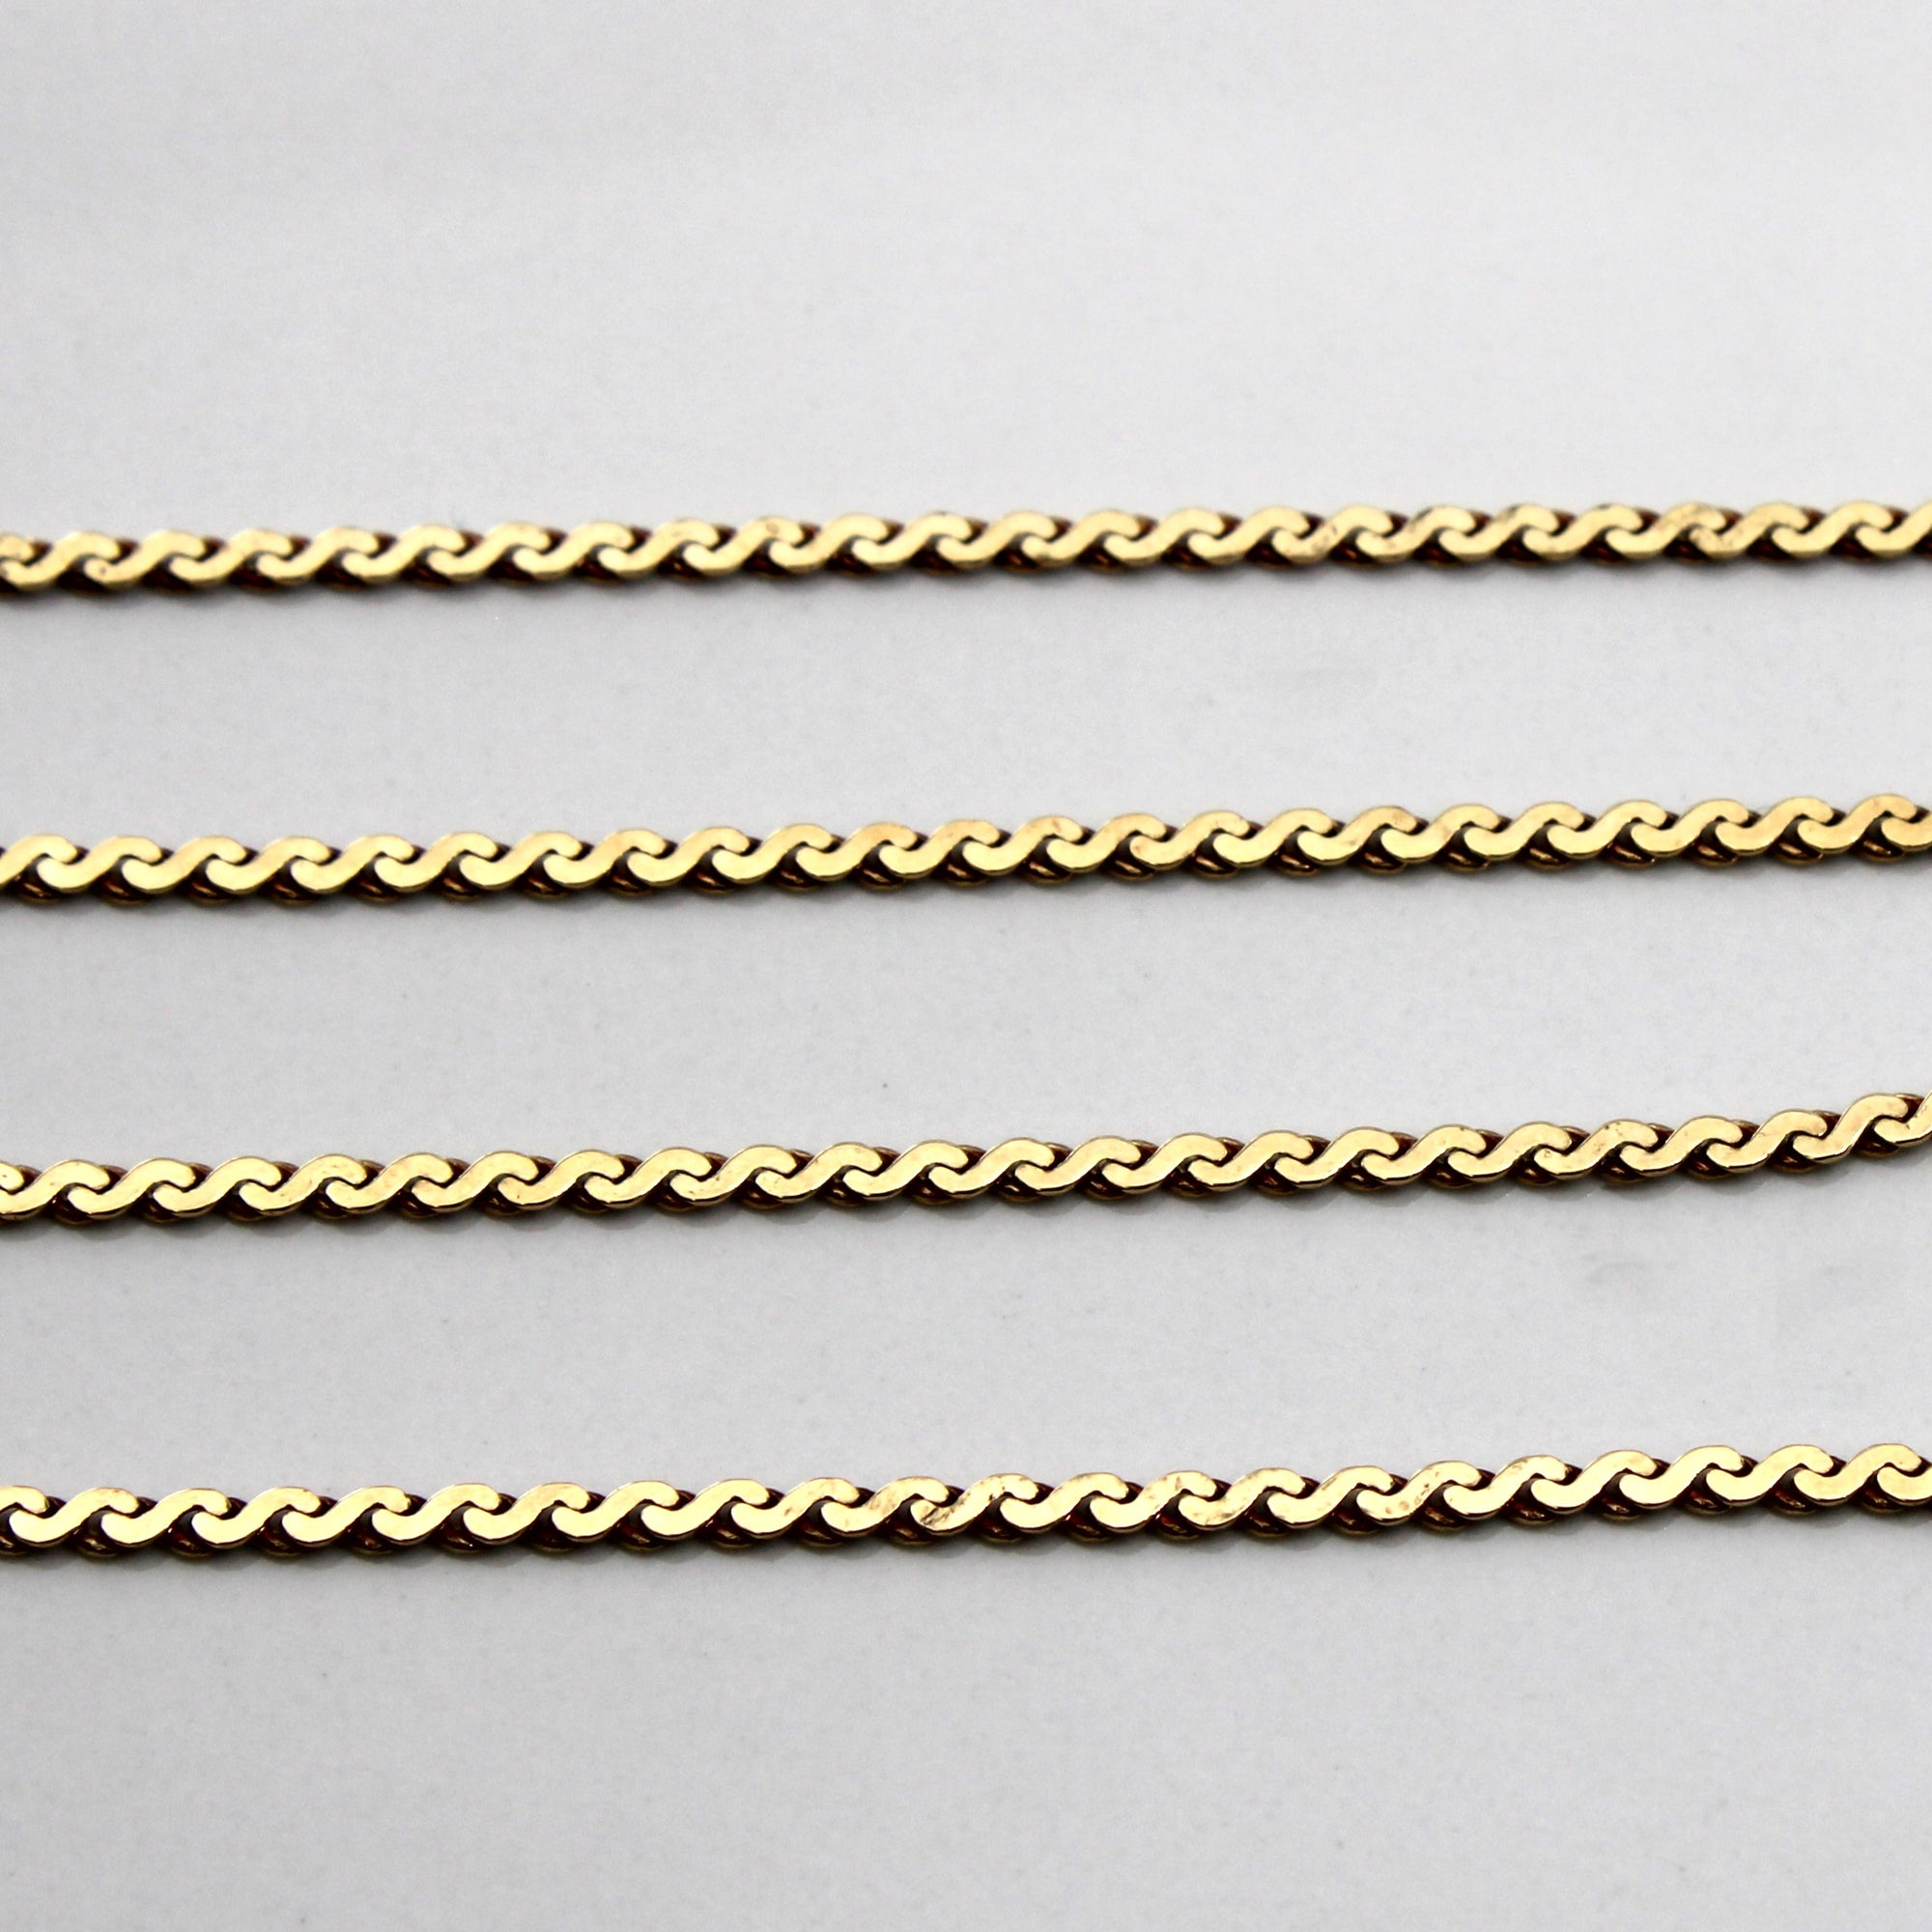 10k Yellow Gold S Link Chain | 20